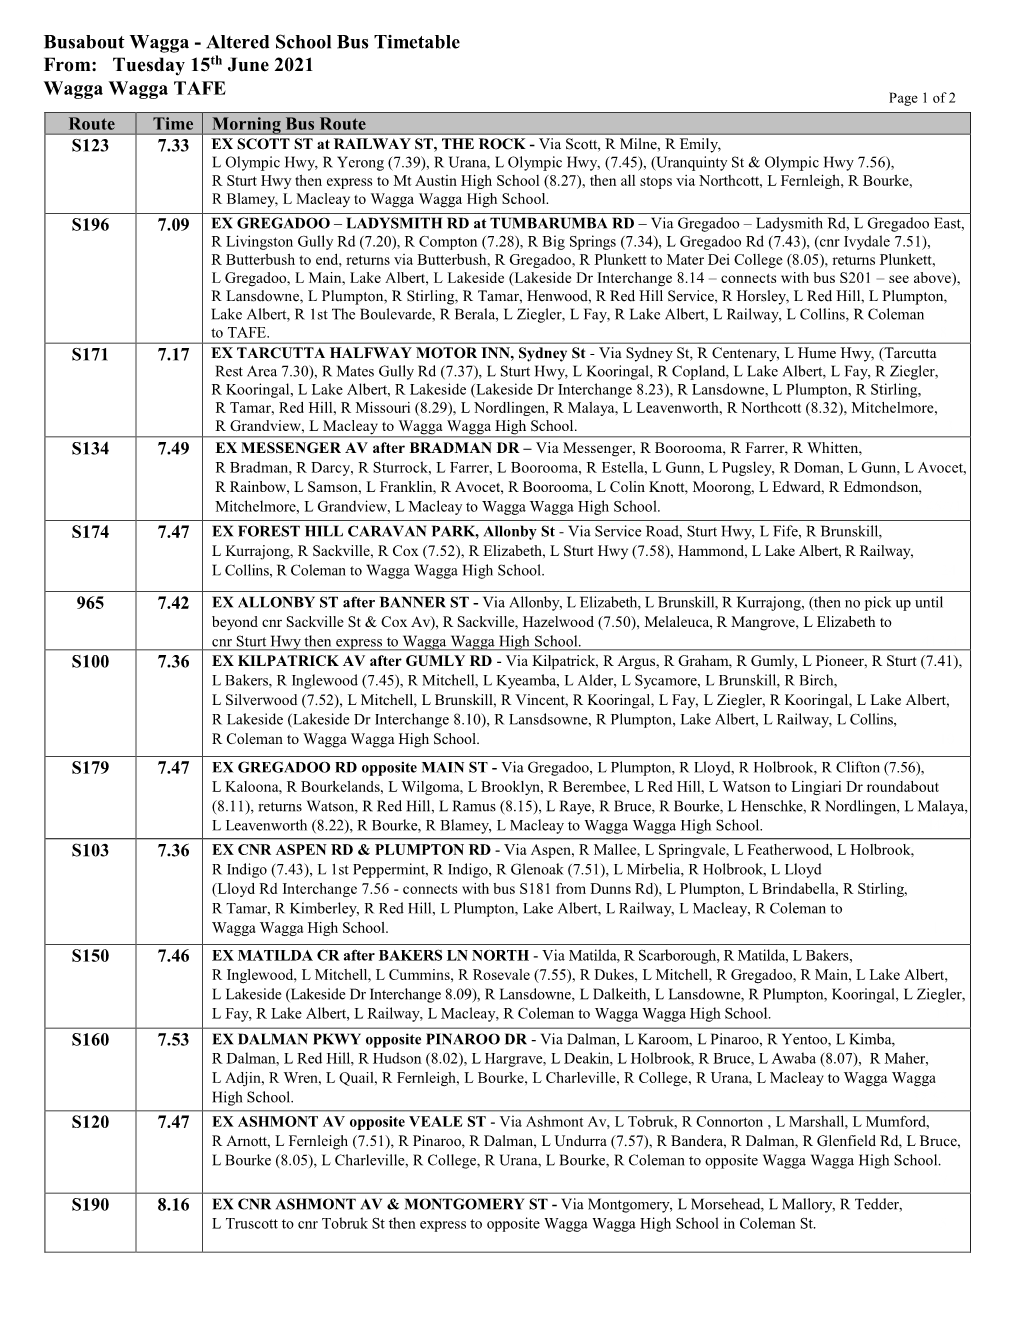 Altered School Bus Timetable From: Tuesday 15Th June 2021 Wagga Wagga TAFE Page 1 of 2